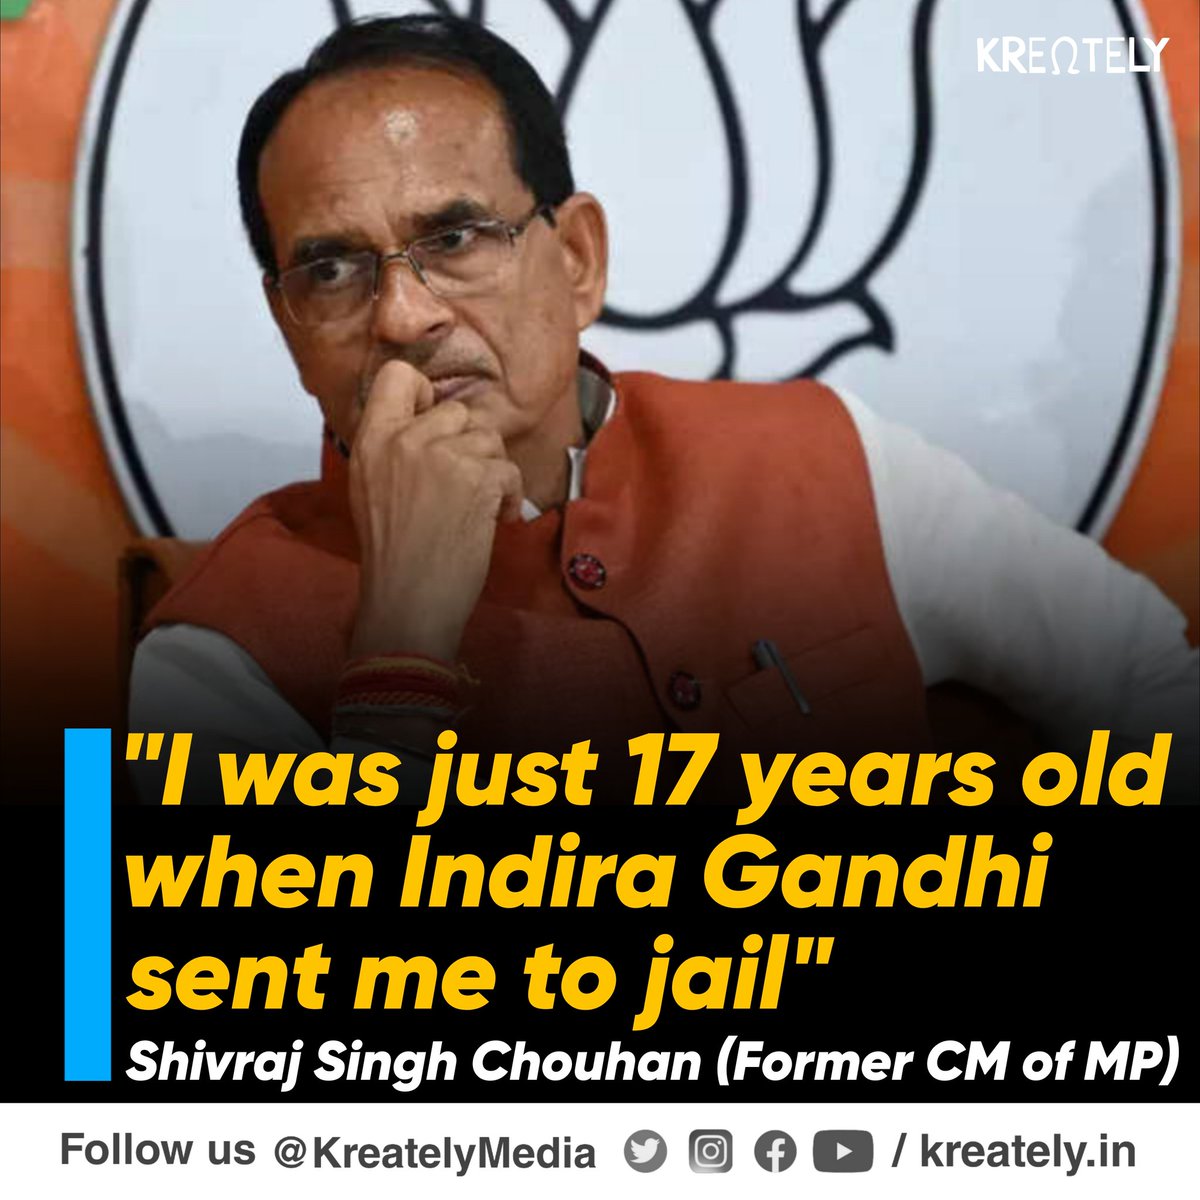 Glimpse of Real Dictatorship !! Even Rajnath Singh Defence Minister was in Jail , not been allowed to meet his mother who was hospitalised for 27 days and passed away